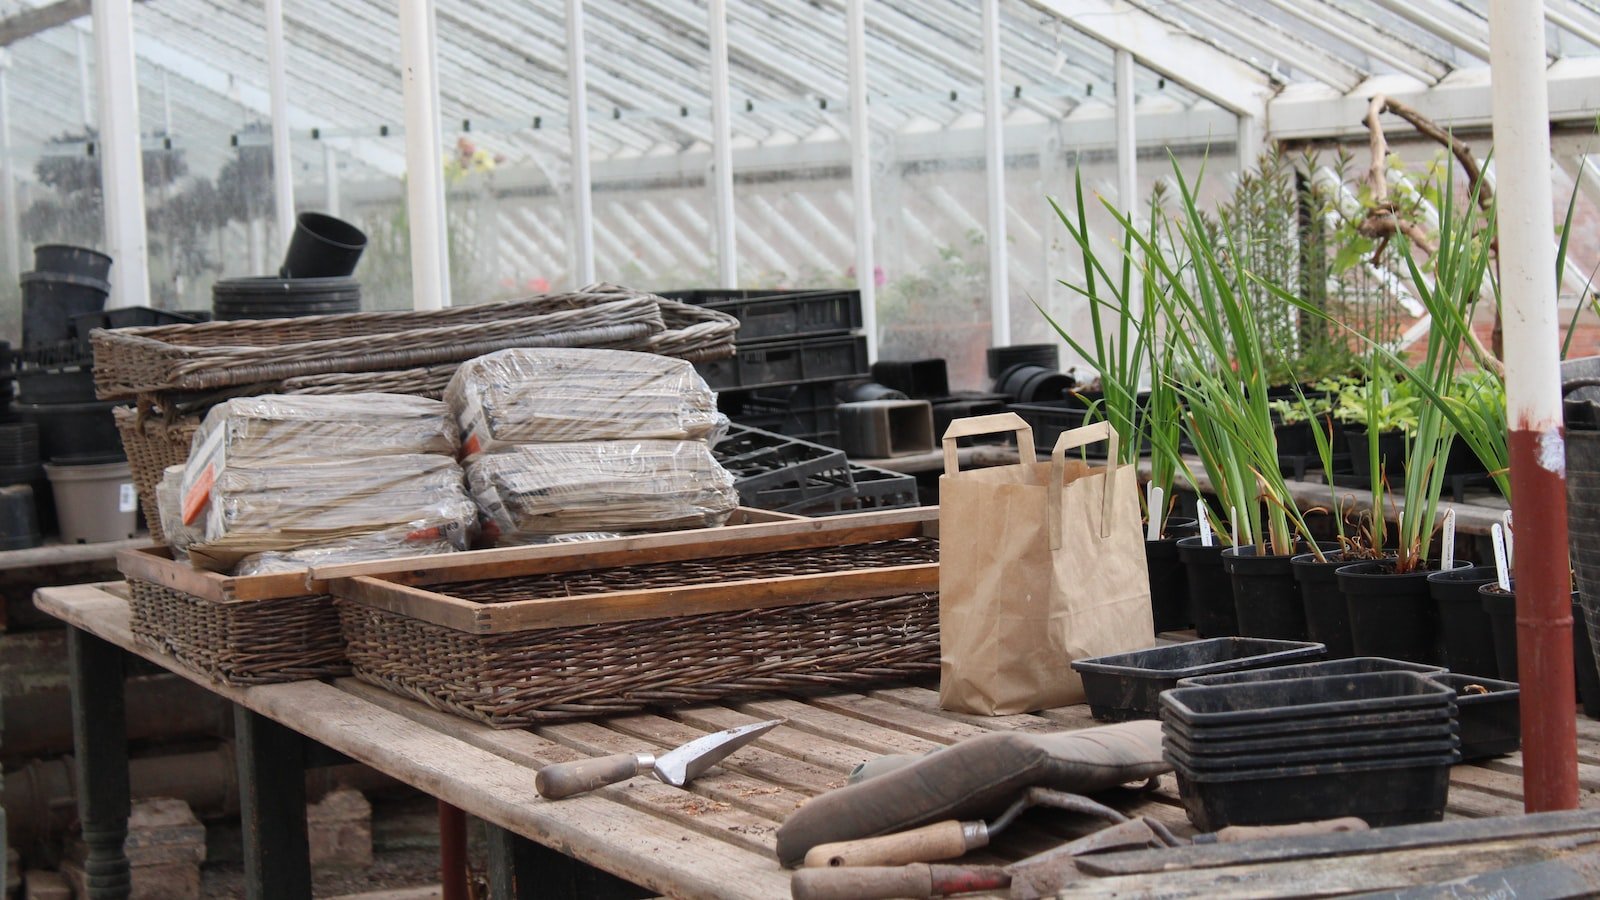 Choosing the Right Location for Your Year-Round Greenhouse